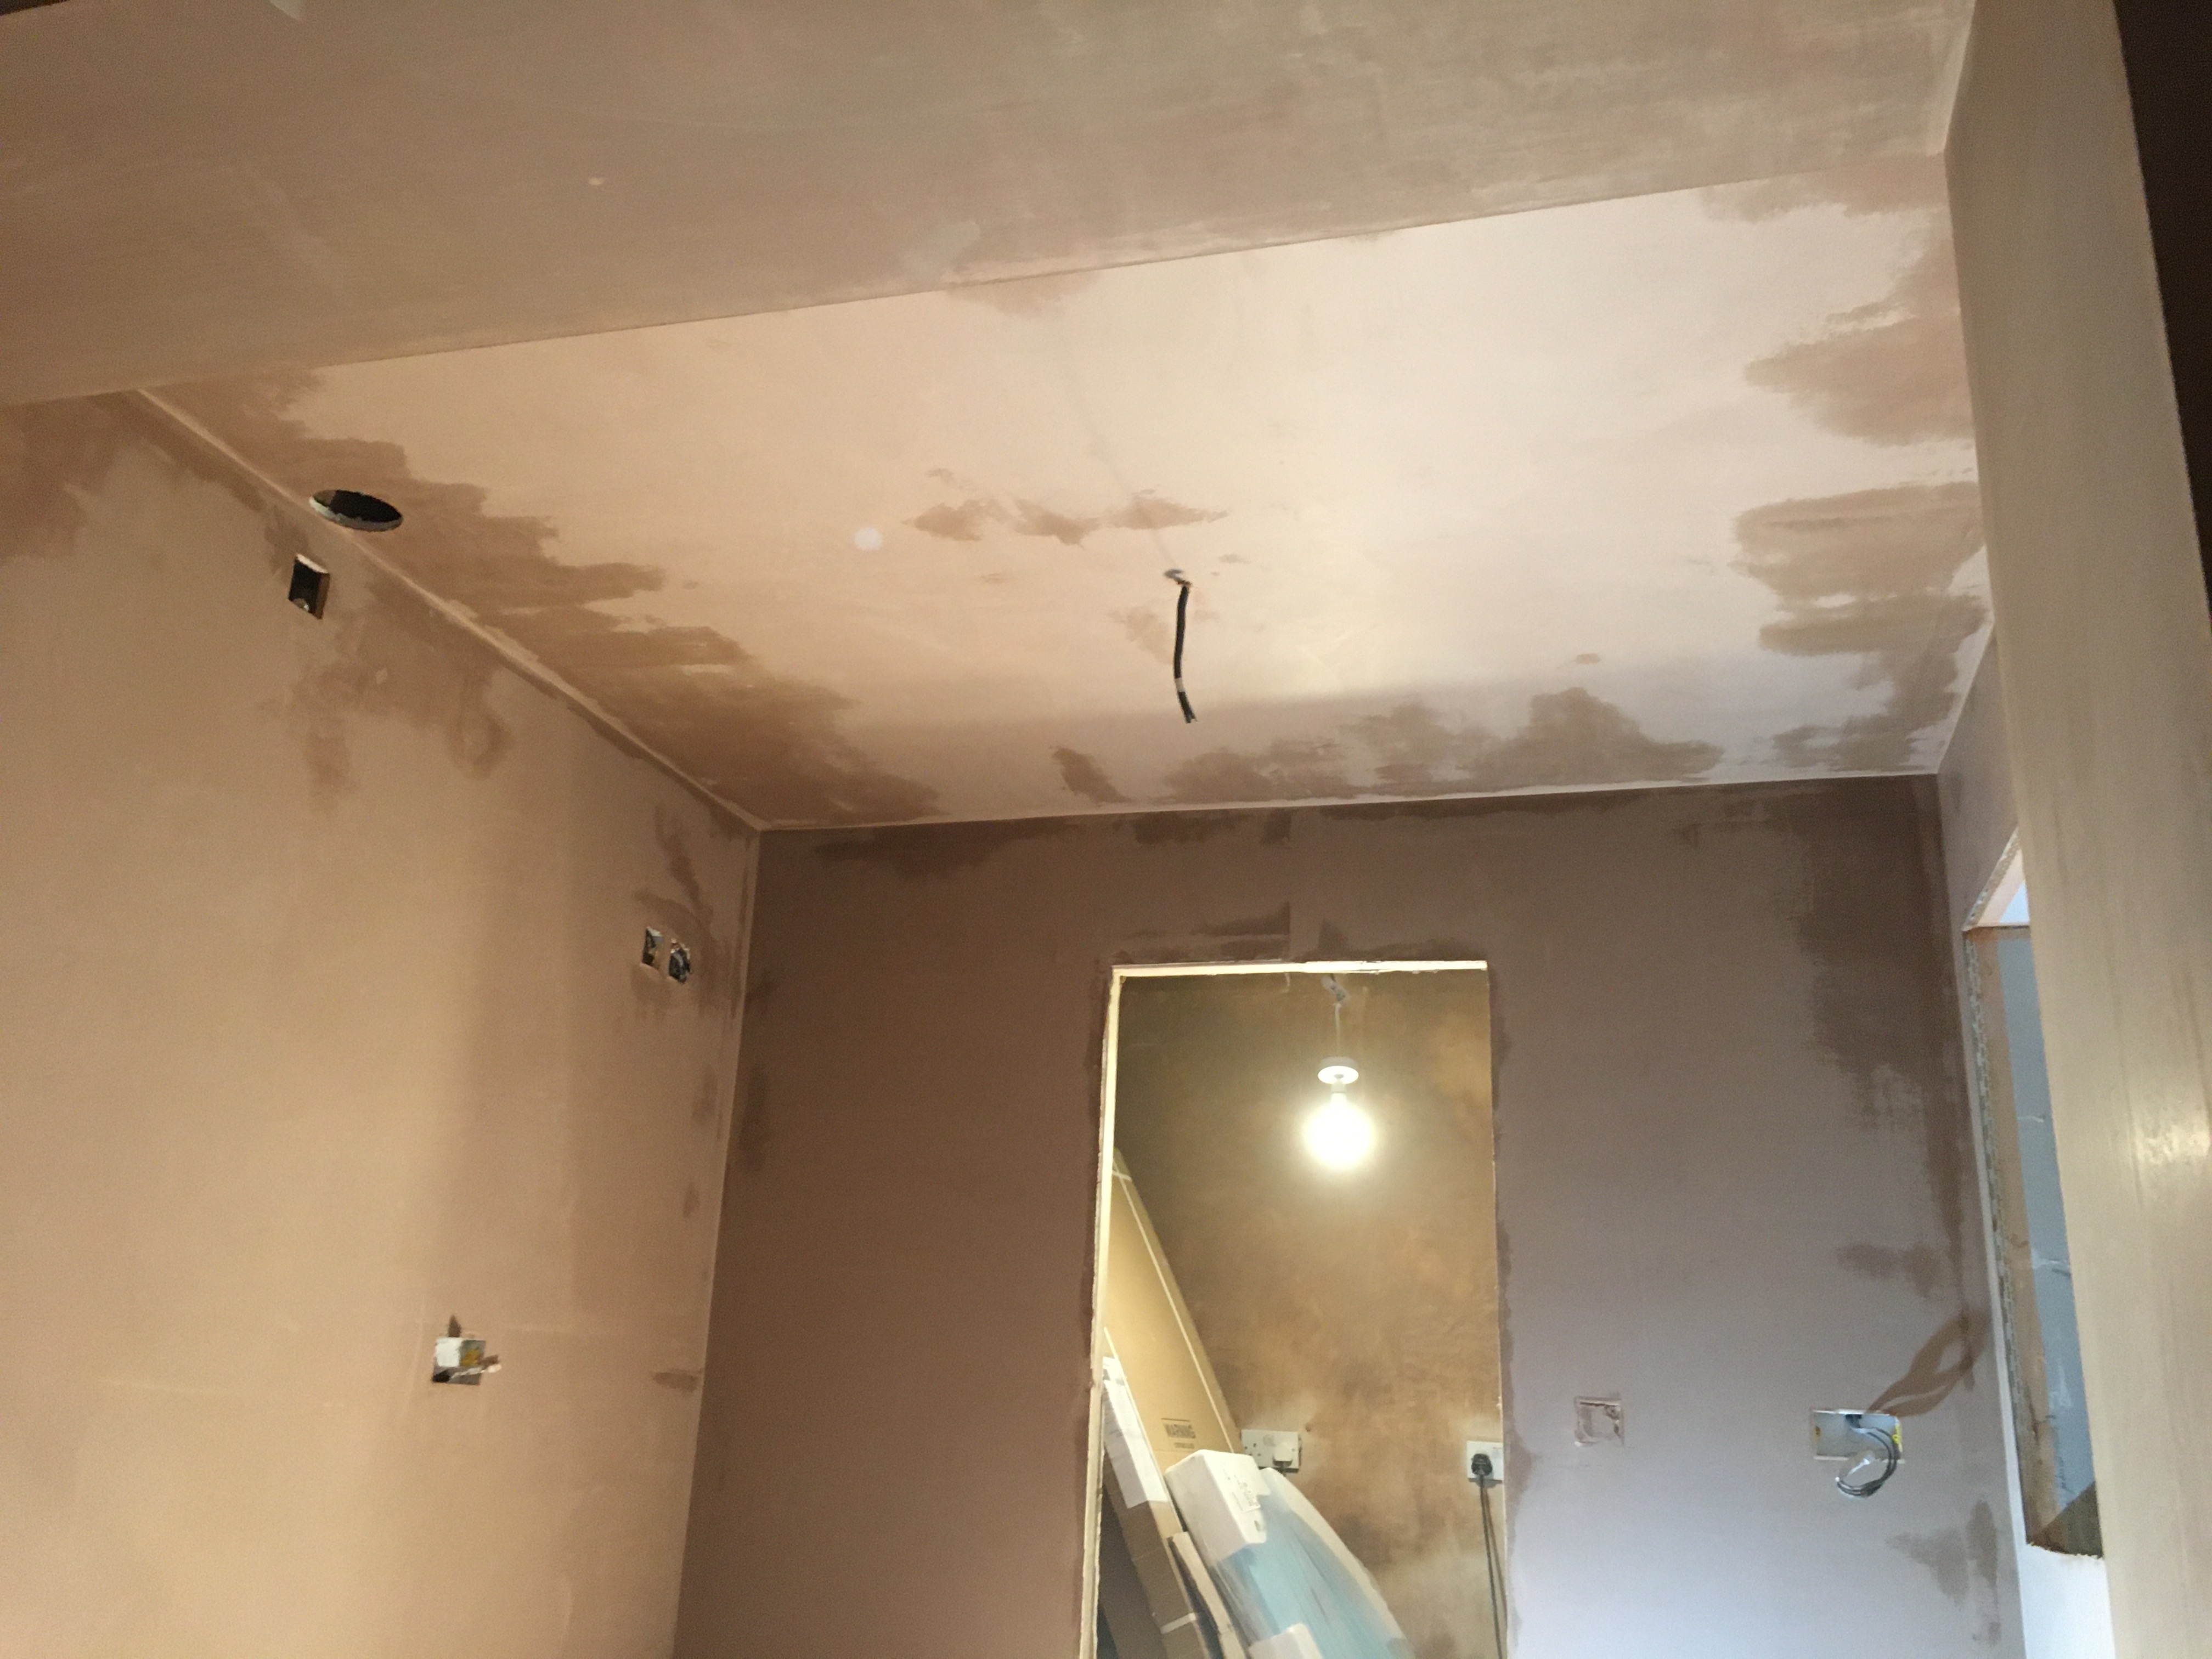 Getting a bit more on | The Original Plasterers Forum - The Plastering ...